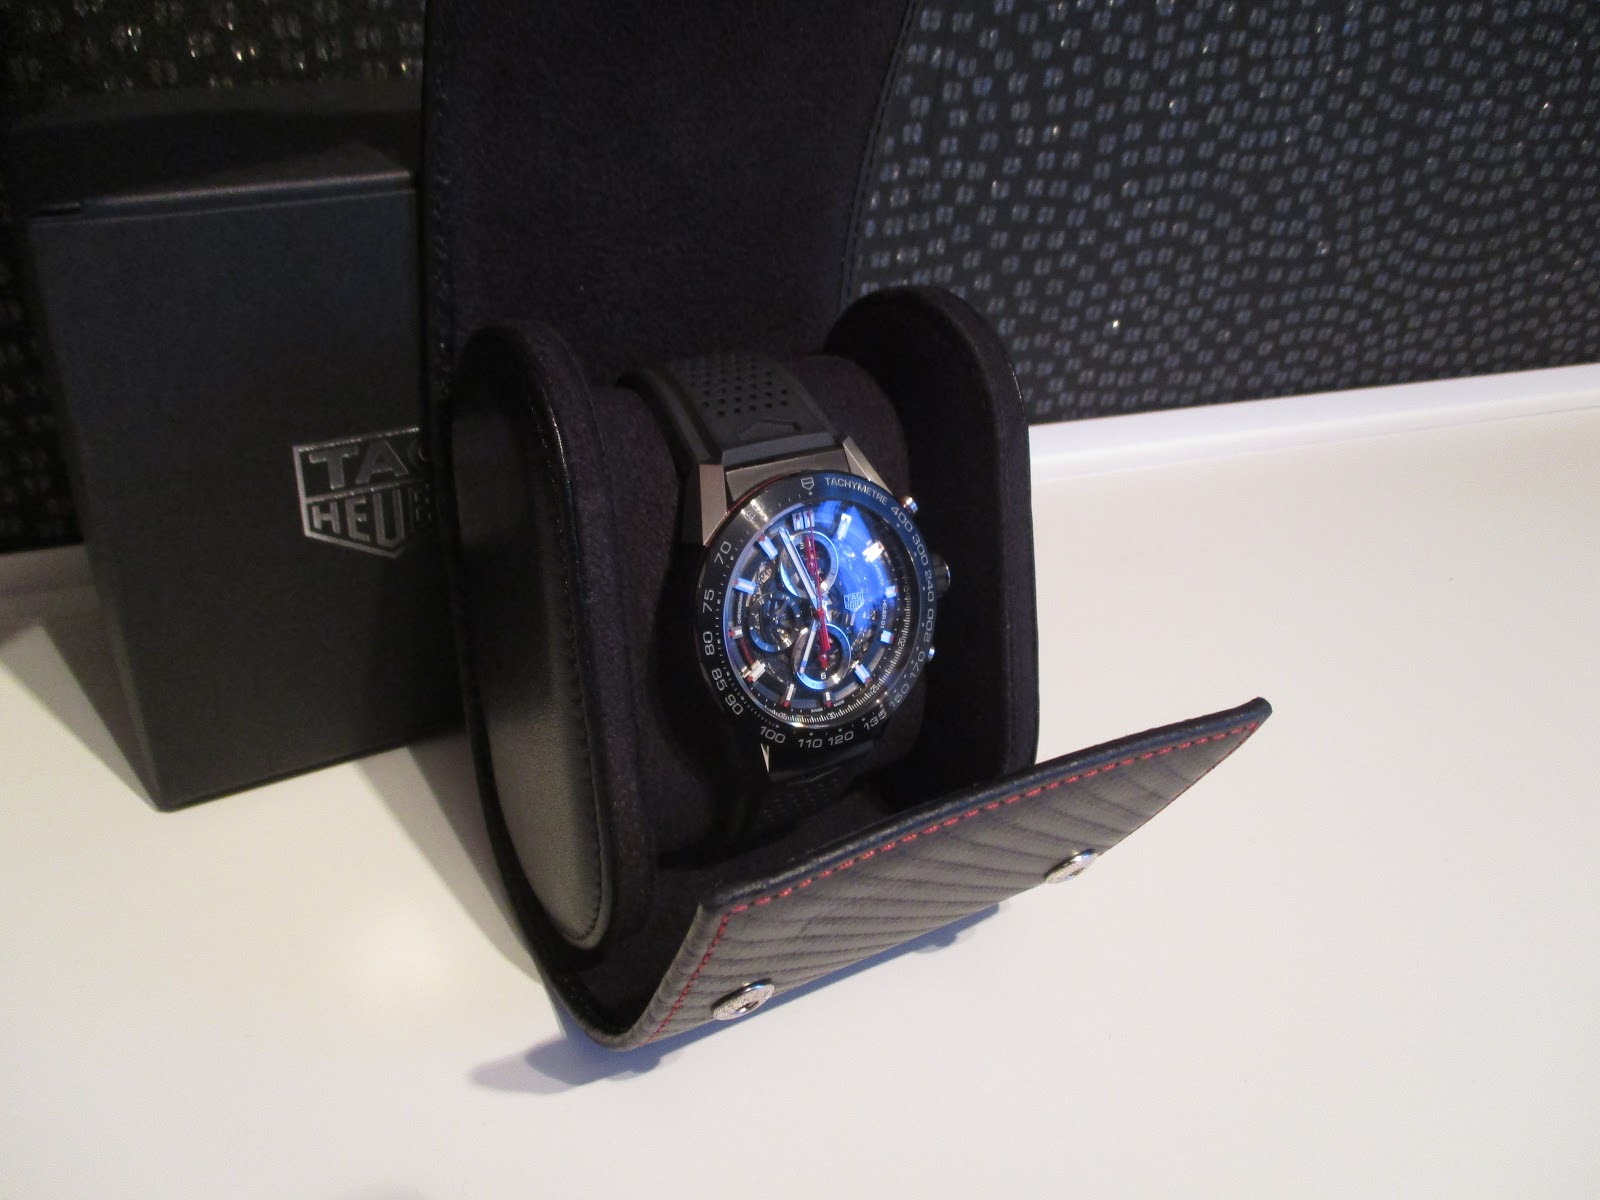 tag heuer travel case